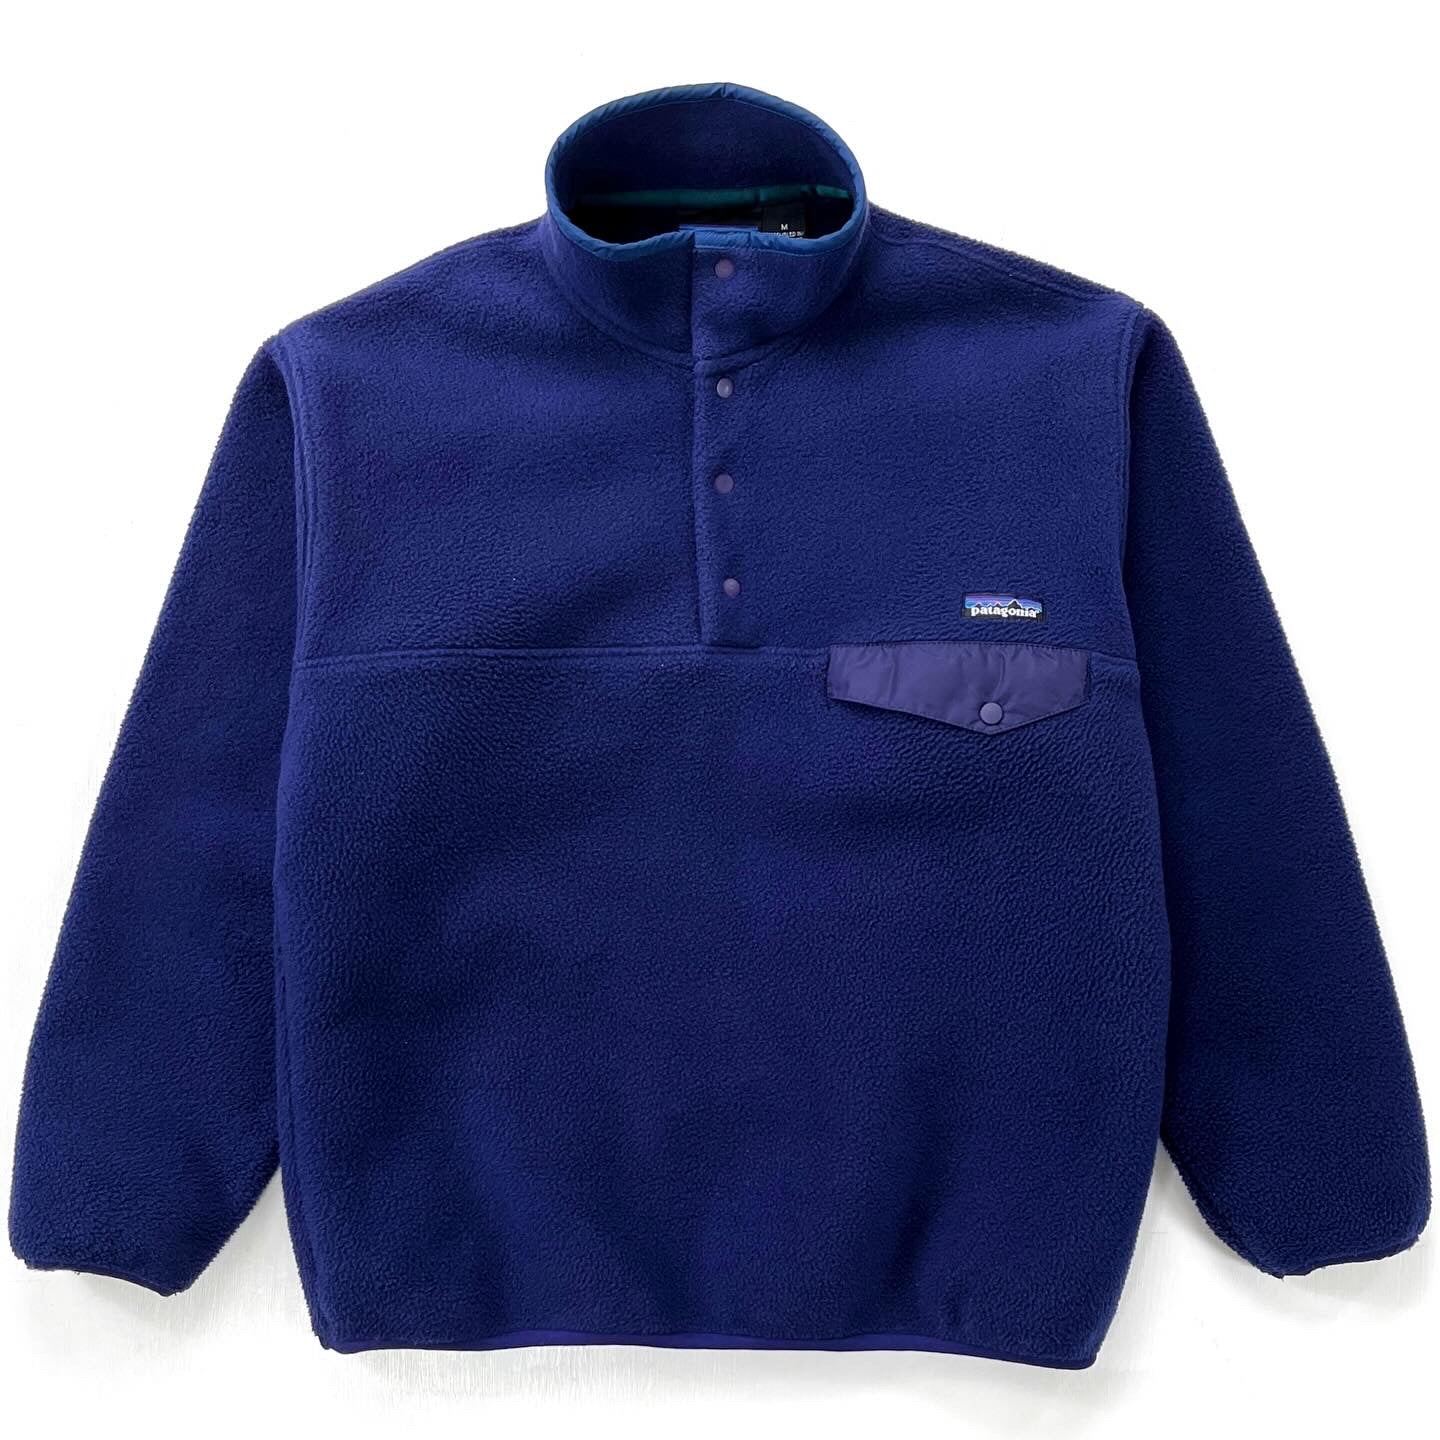 1995 Patagonia Synchilla Snap-T, Bright Navy & Storm Blue (M)